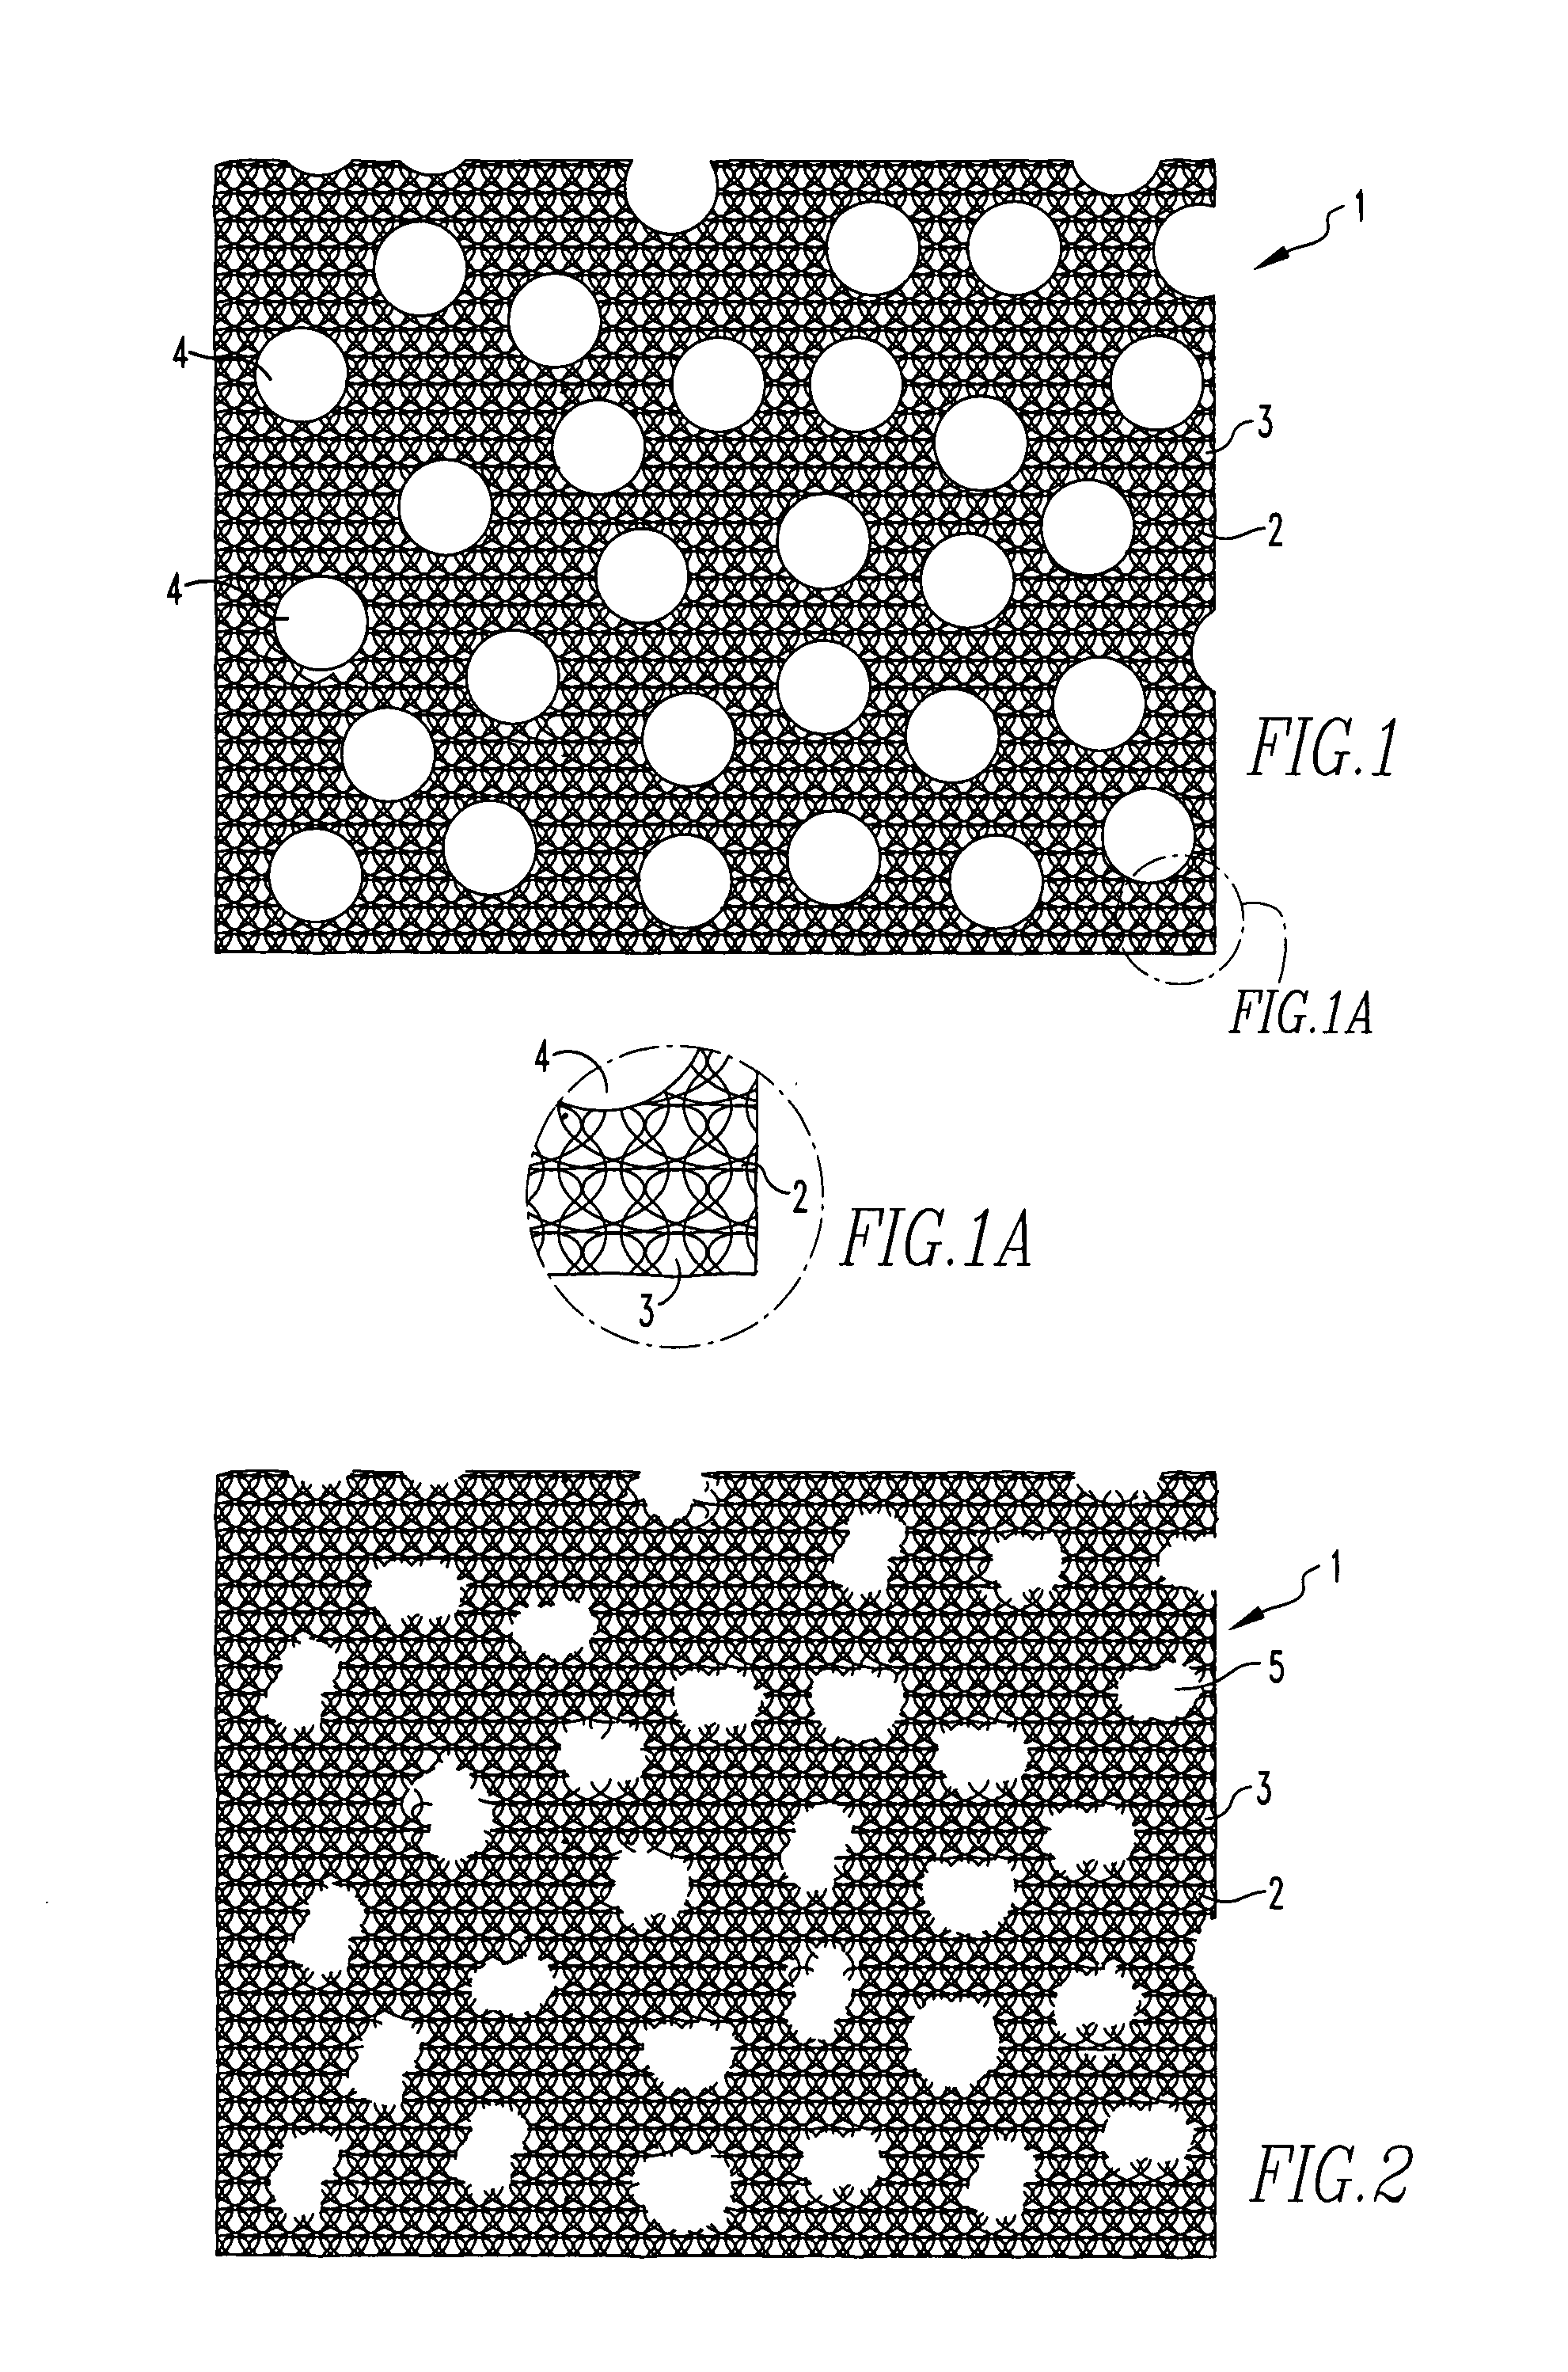 Filamentary pad for improved mist elimination and mass transfer